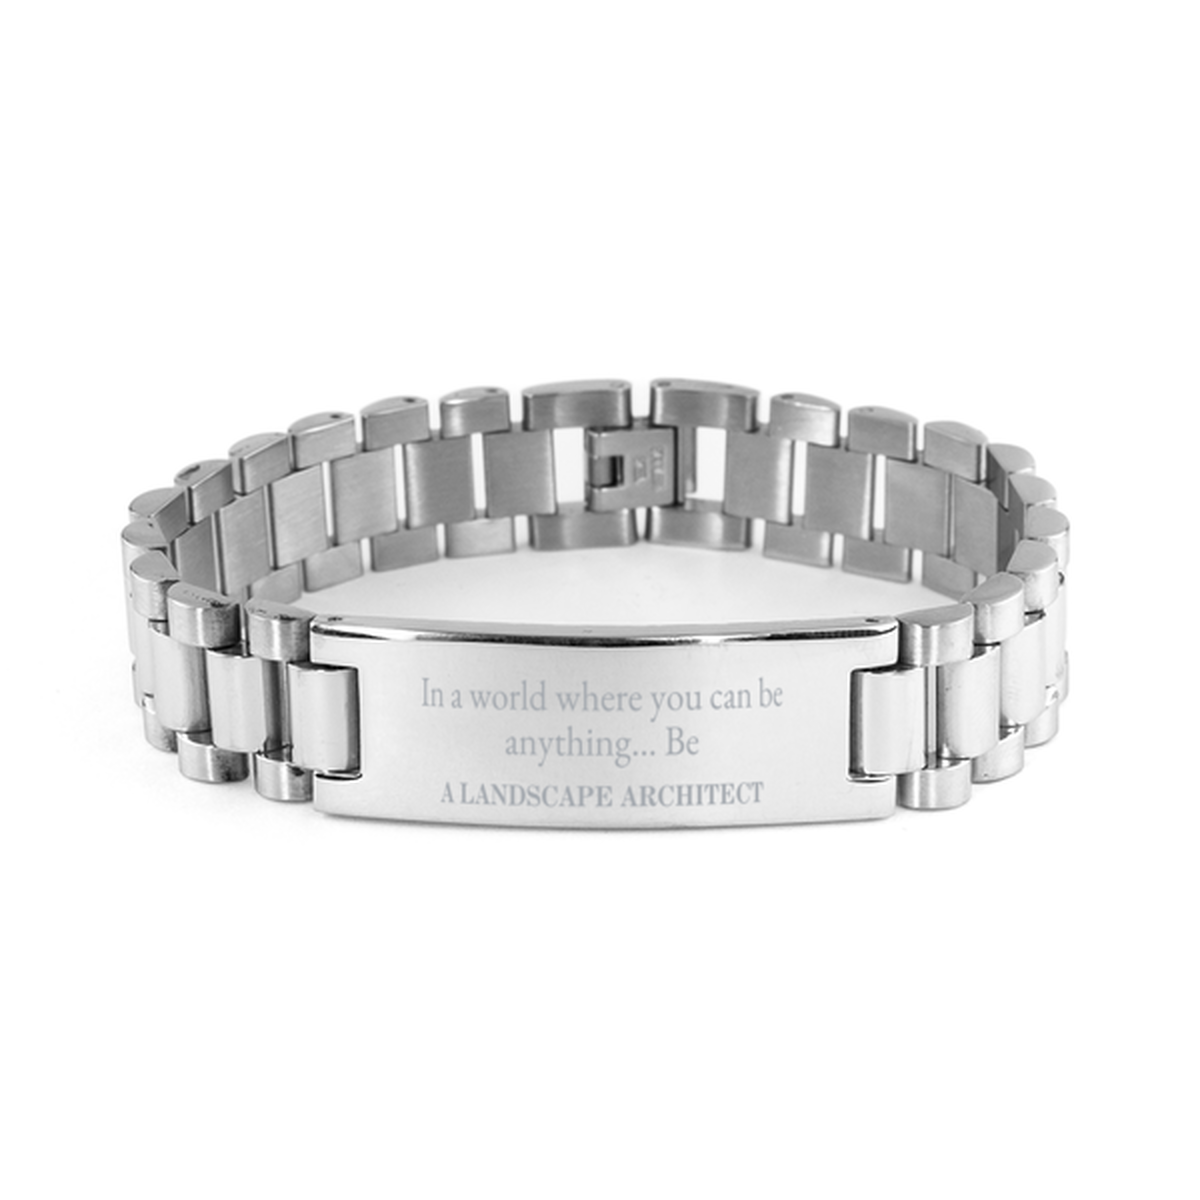 Gifts for Landscape Architect, In a world where you can be anything, Appreciation Birthday Ladder Stainless Steel Bracelet for Men, Women, Friends, Coworkers